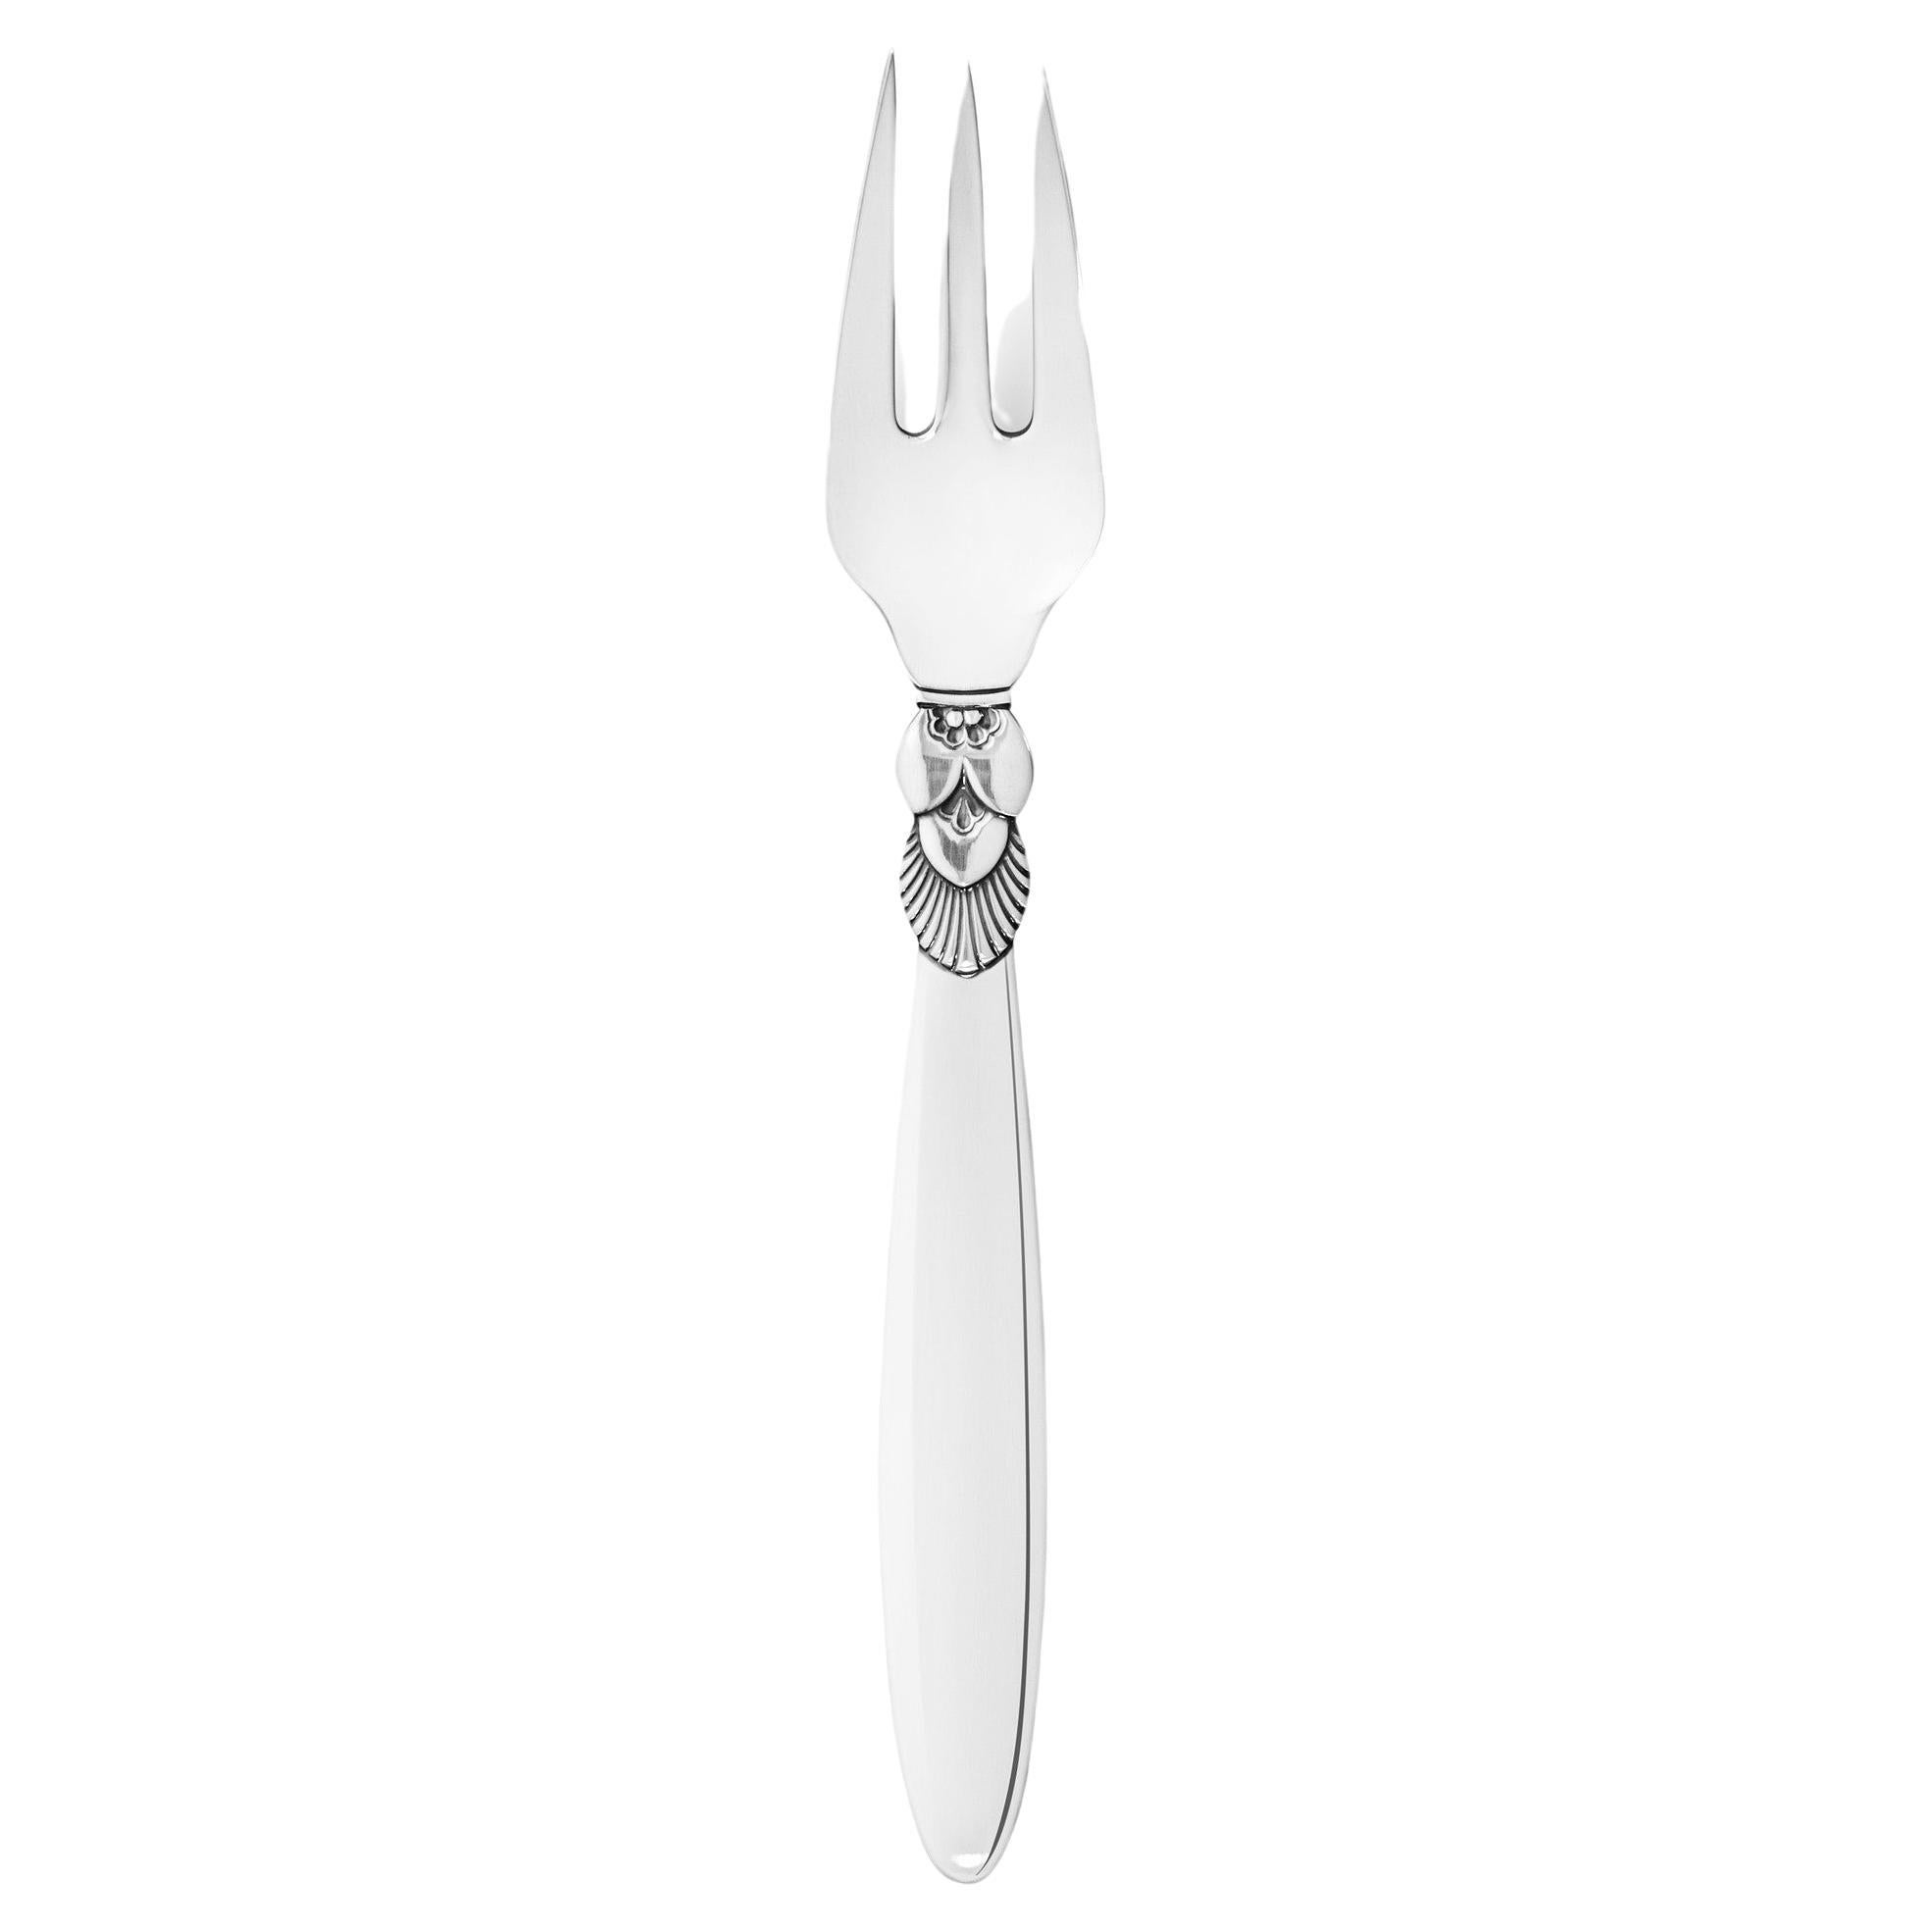 New Georg Jensen Cactus Sterling Silver Fish Fork 061 For Sale